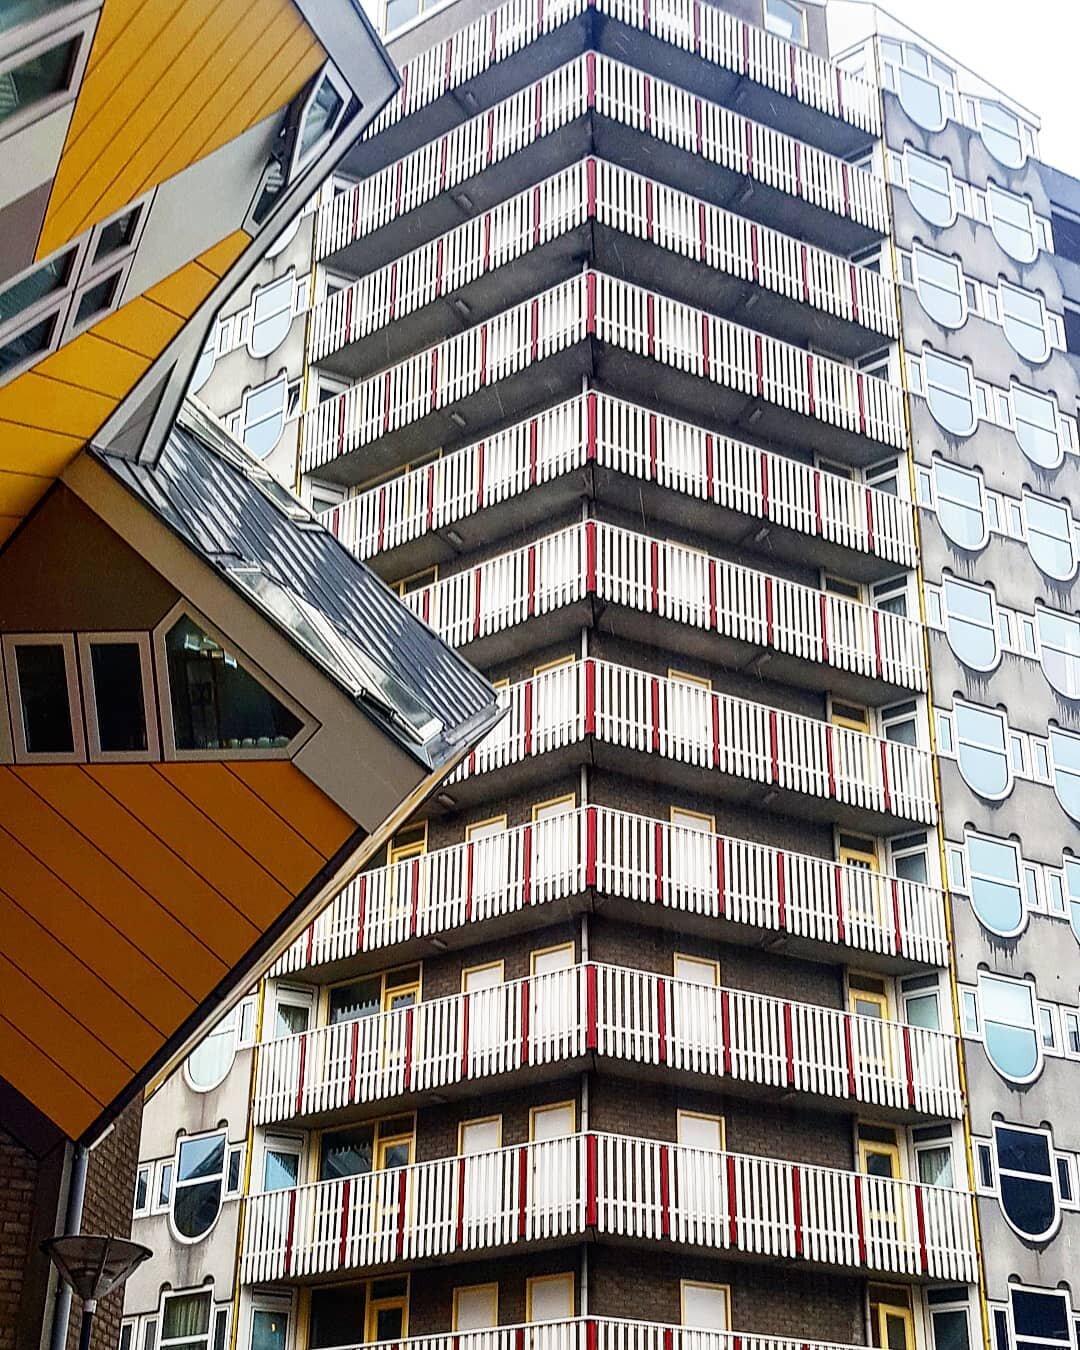 #marchmeetthemaker
Day 13 photography
My favourite way to spend a day is wandering around a city with my cameras taking pictures of buildings. Architecture is definitely my favourite thing to photograph. This is photo is from a recent trip to Rotterd